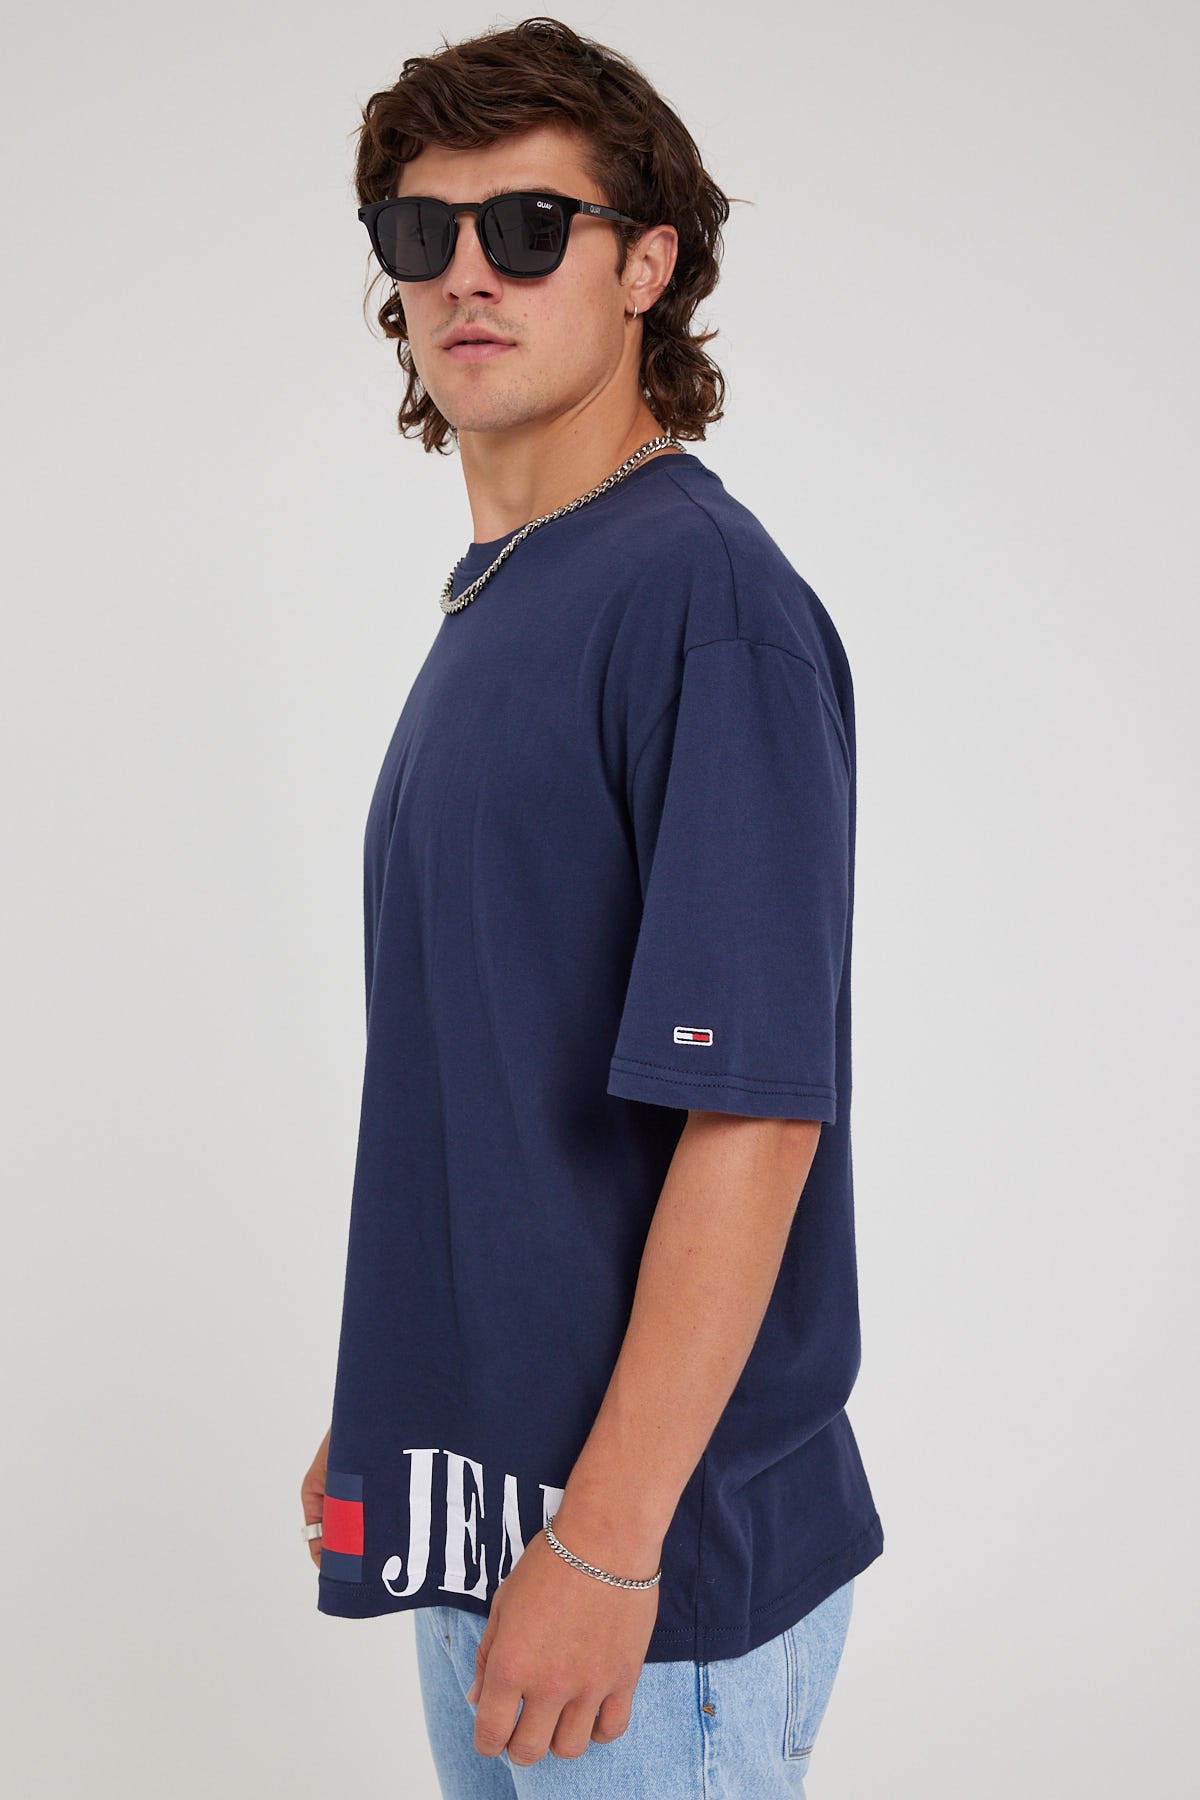 Tommy Jeans TJM Printed Archive Tee Twilight Navy – Universal Store